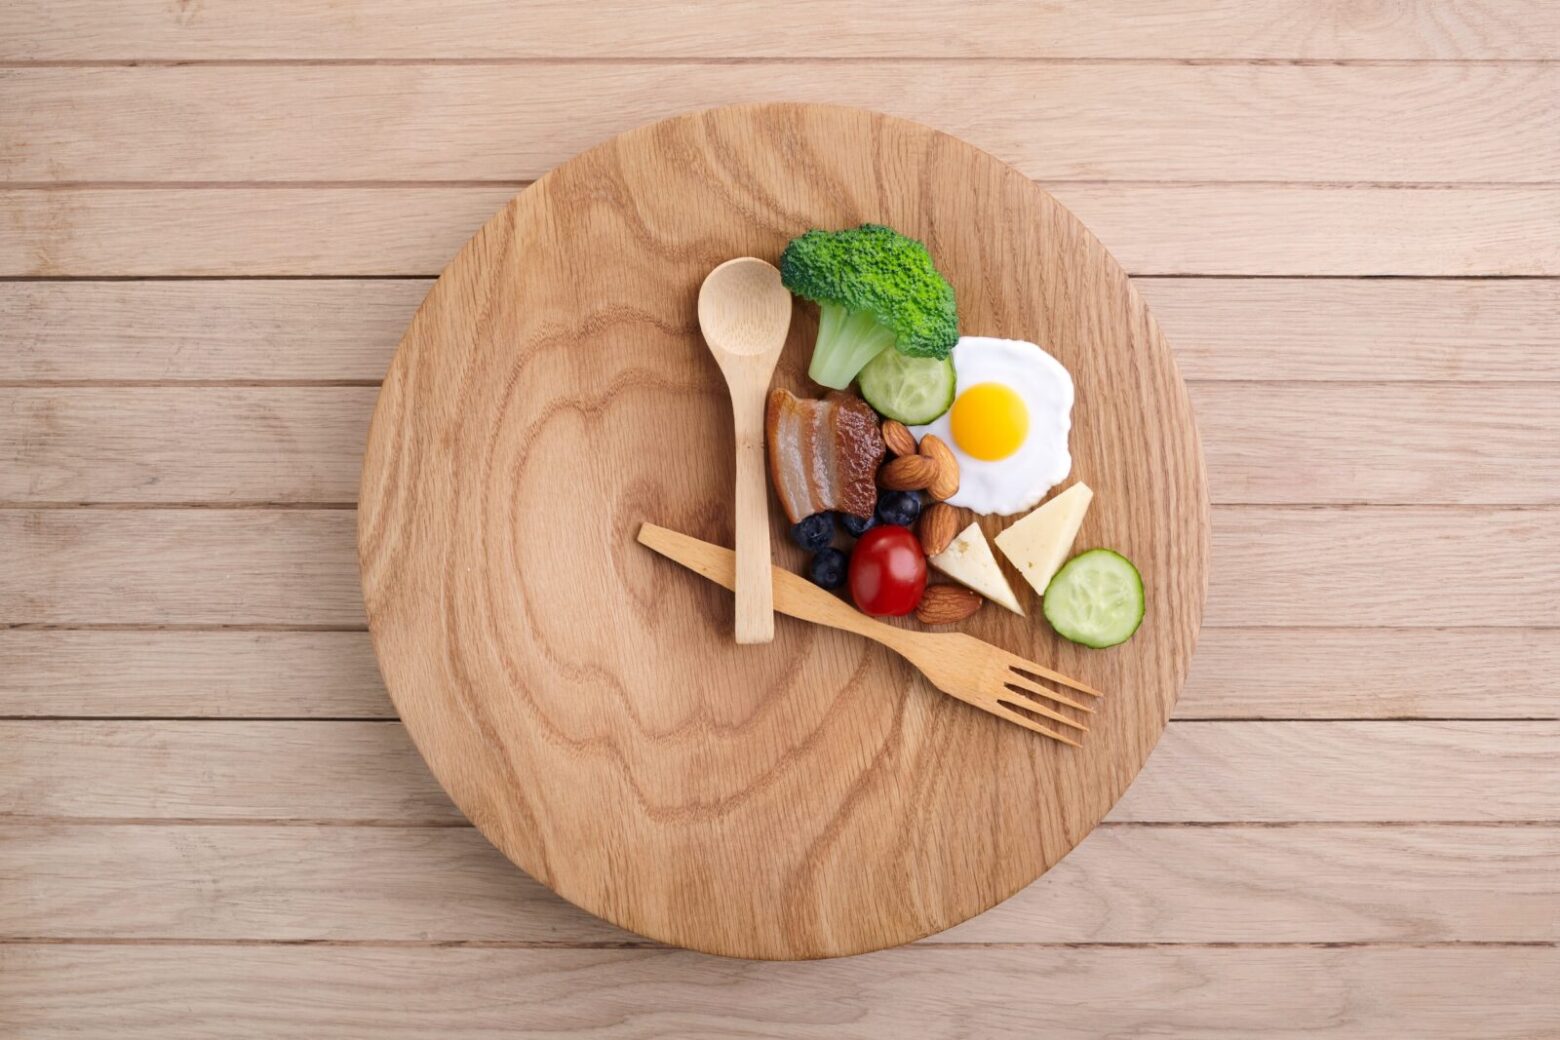 A wooden plate is set with utensils in the shape of a clock with food inside the utensils to indicate an intermittent fasting schedule.